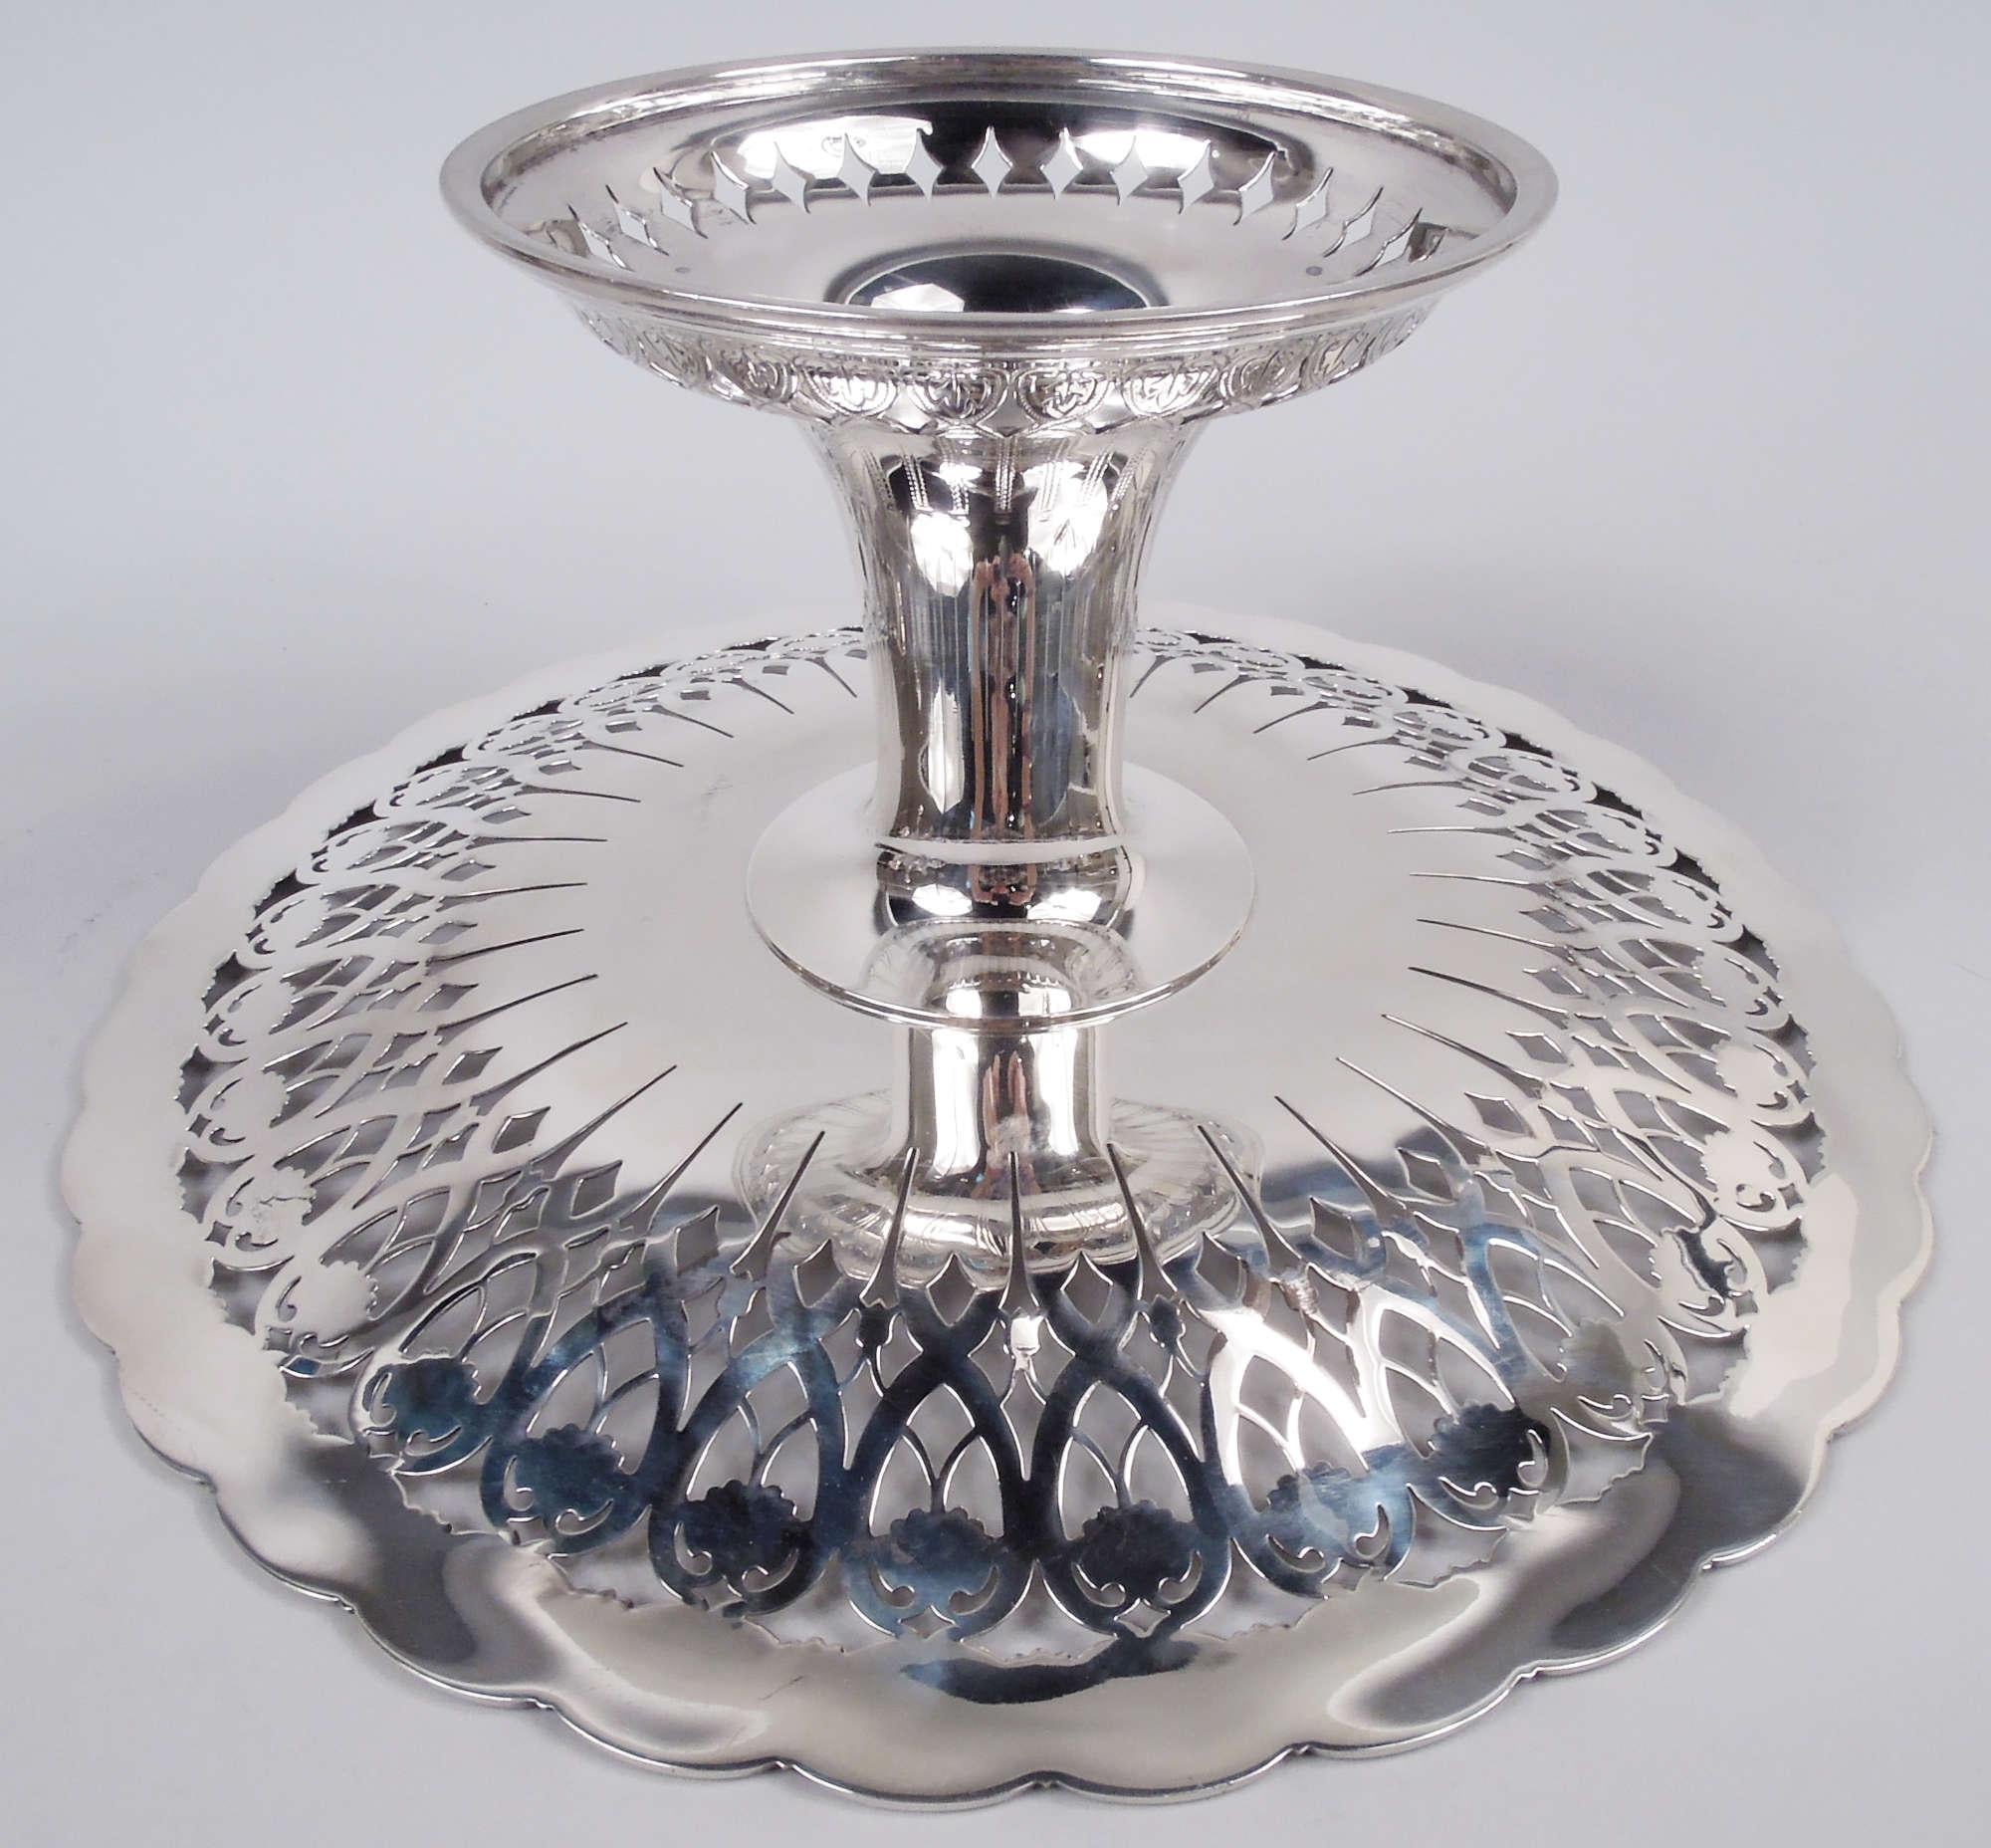 Large Tiffany American Edwardian Art Nouveau Sterling Silver Compote 3